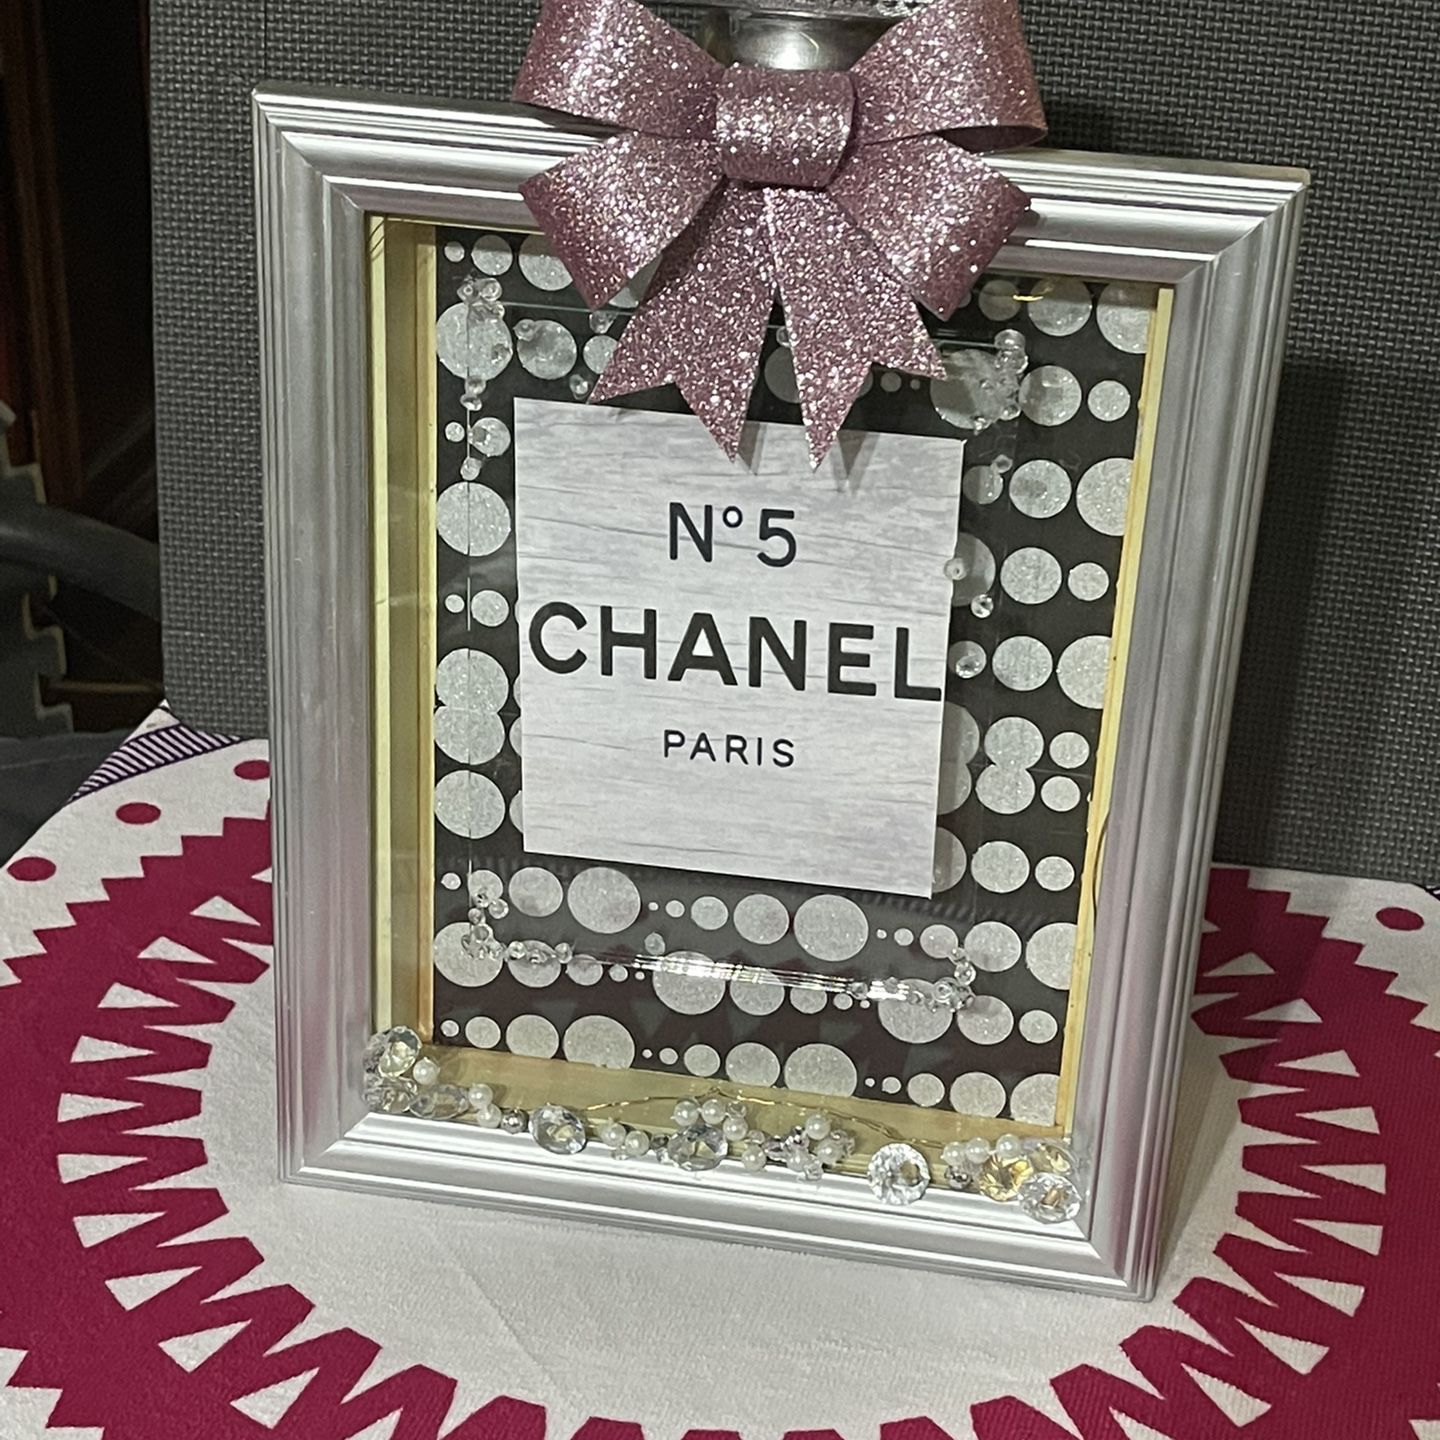 Chanel Perfume Bottle for Sale in Fresno, CA - OfferUp